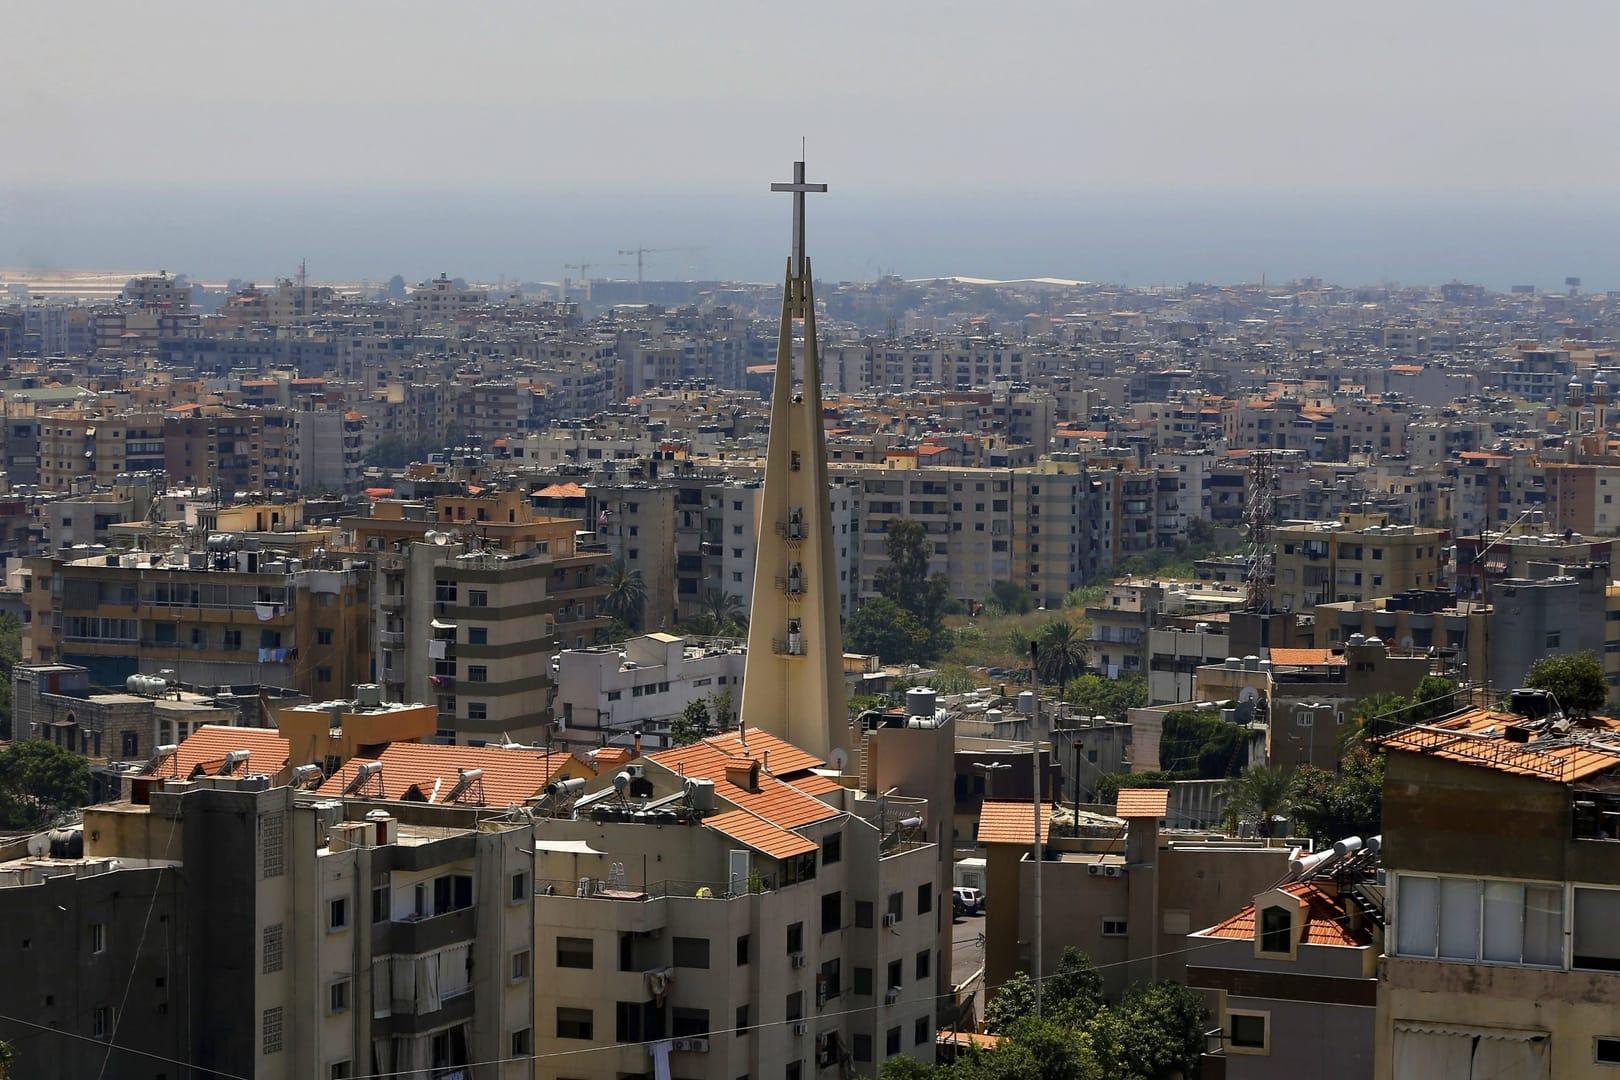 Christian town in Lebanon bans Muslims from buying, renting property